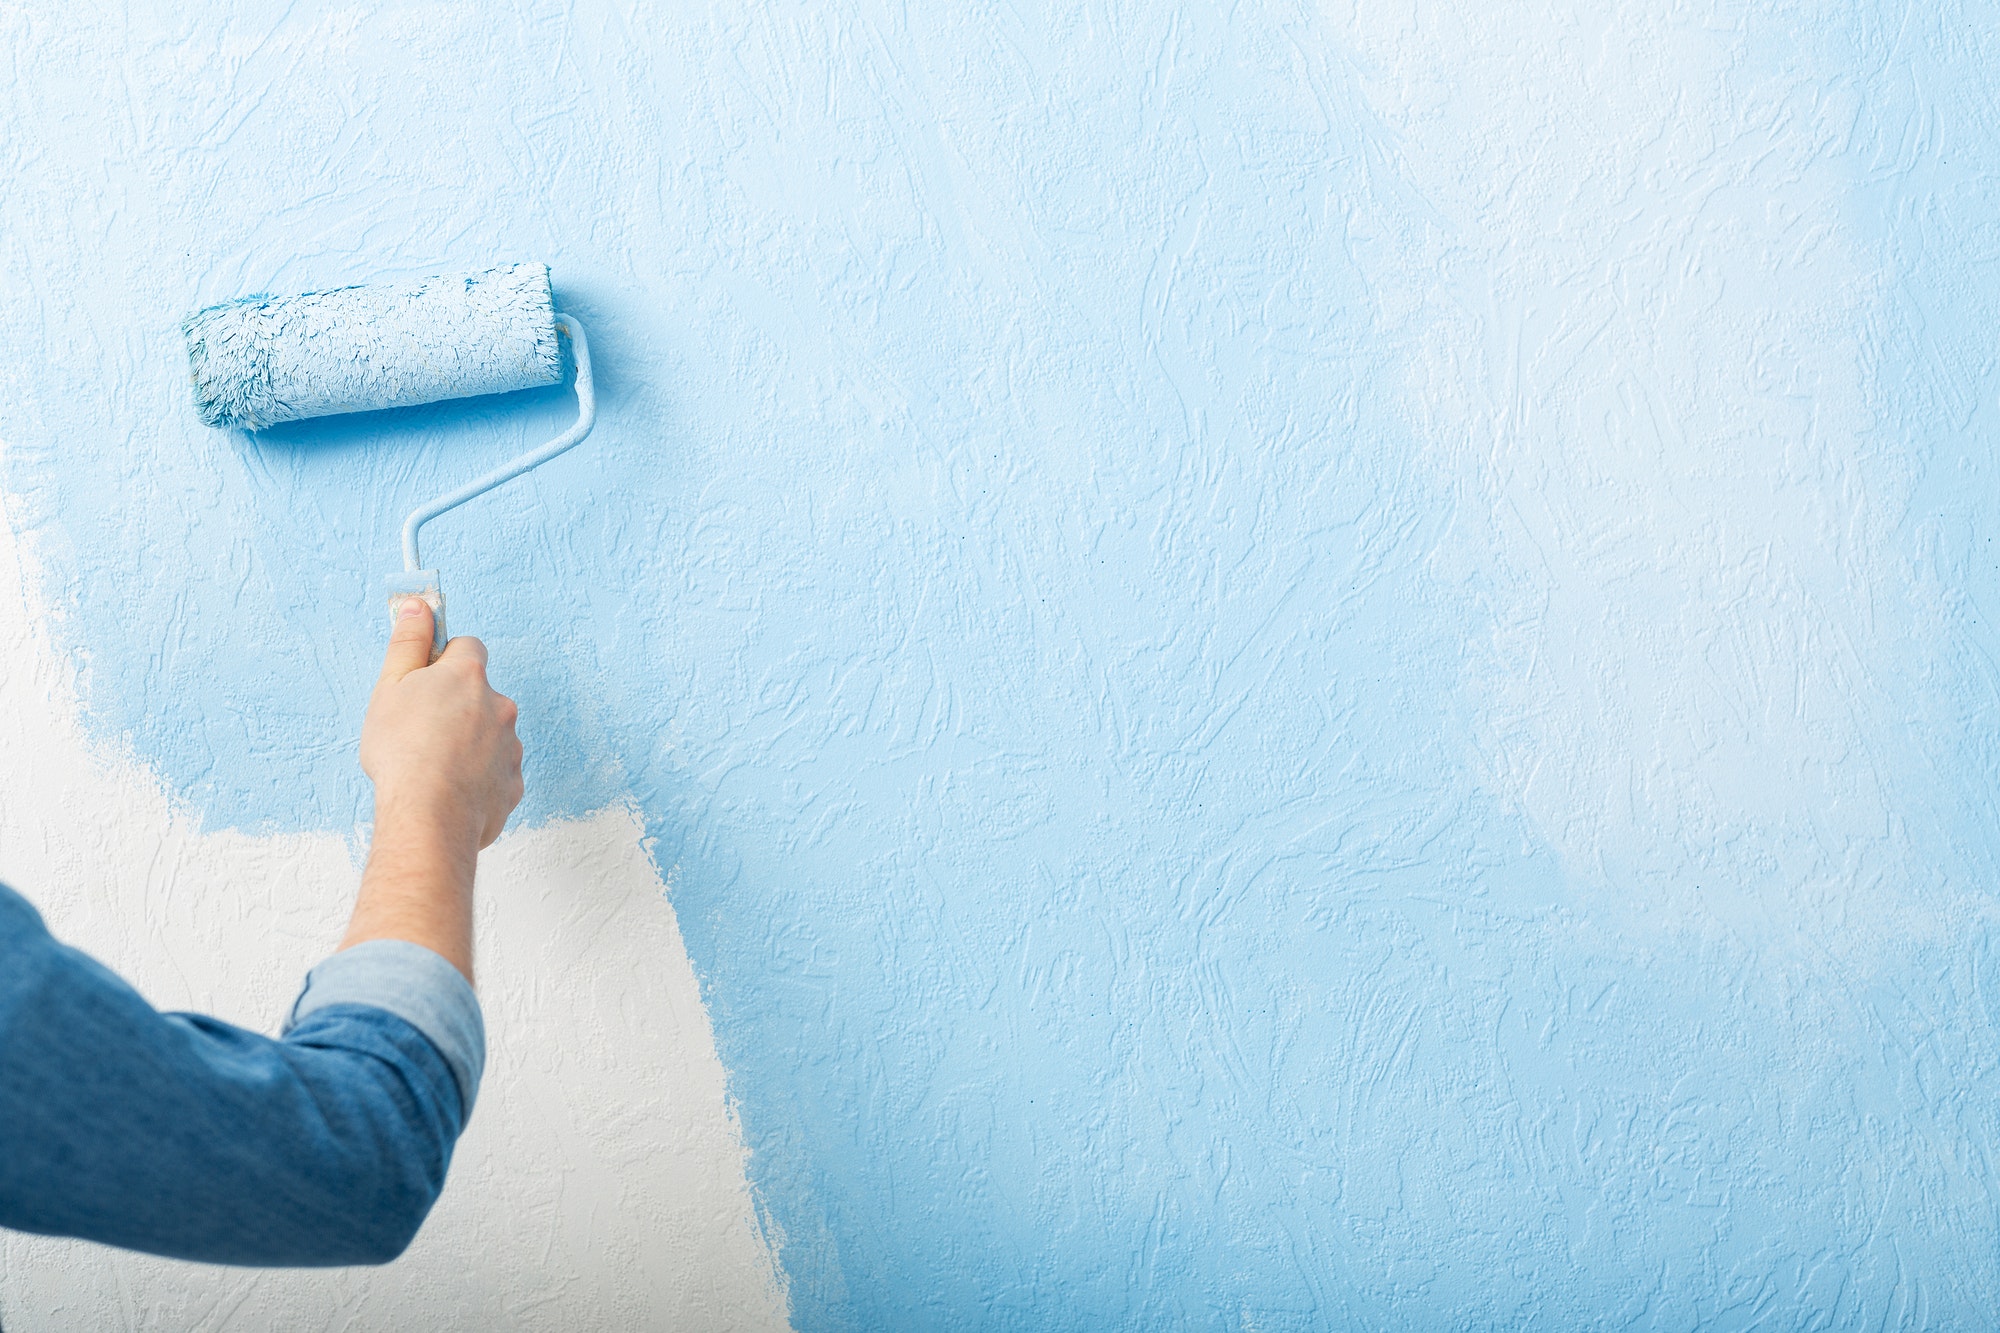 Paints texture wall with roller in blue